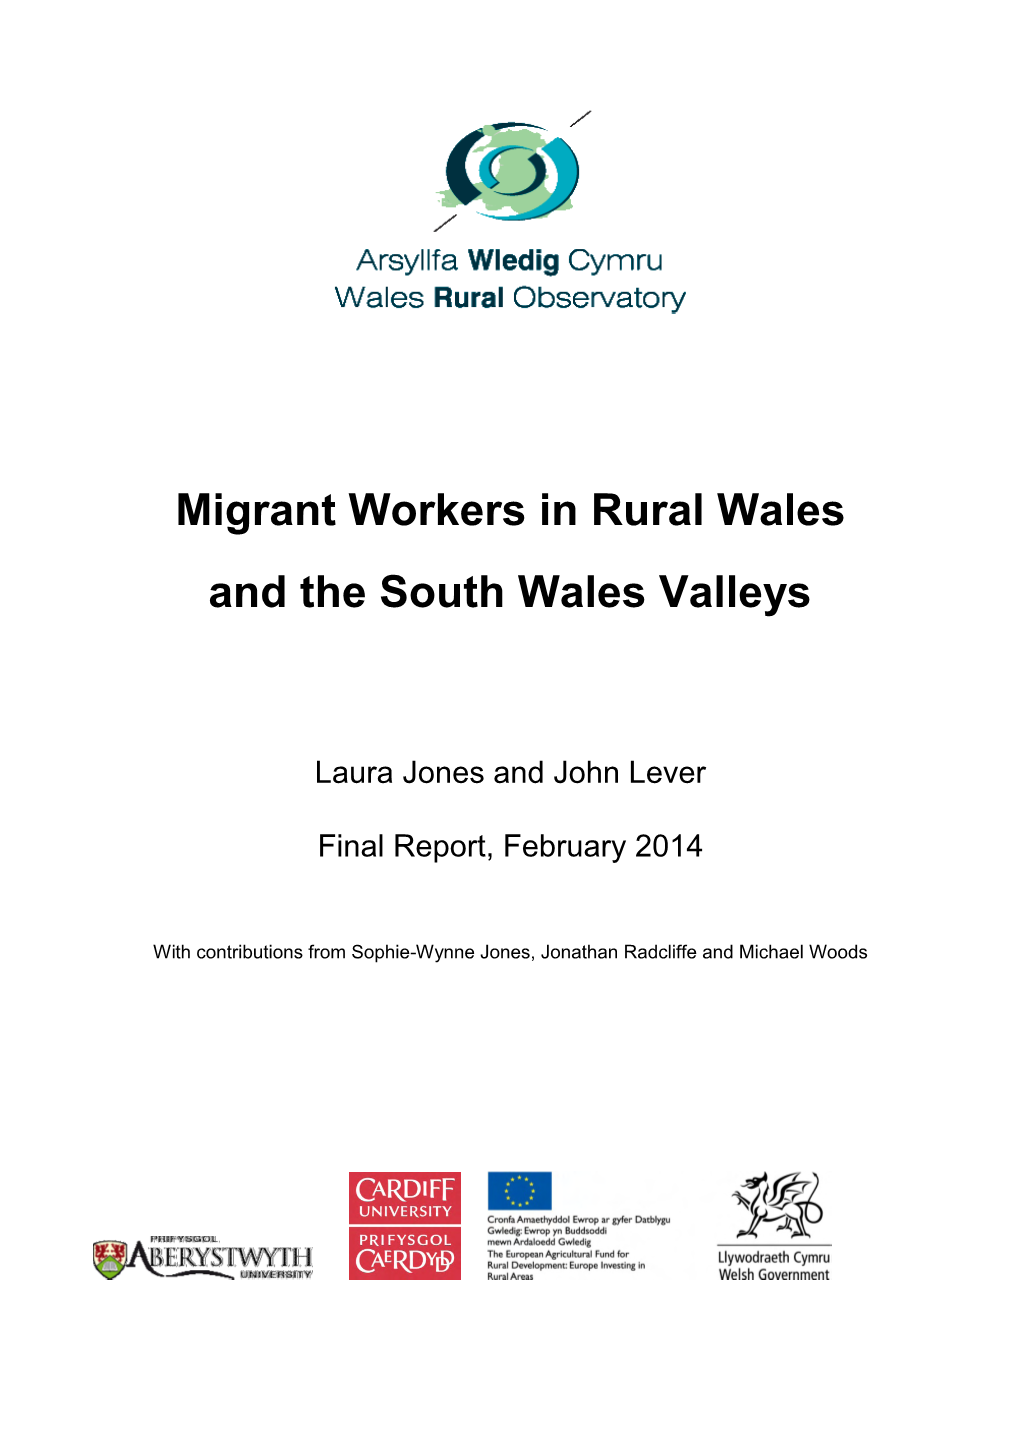 Migrant Workers in Rural Wales and the South Wales Valleys